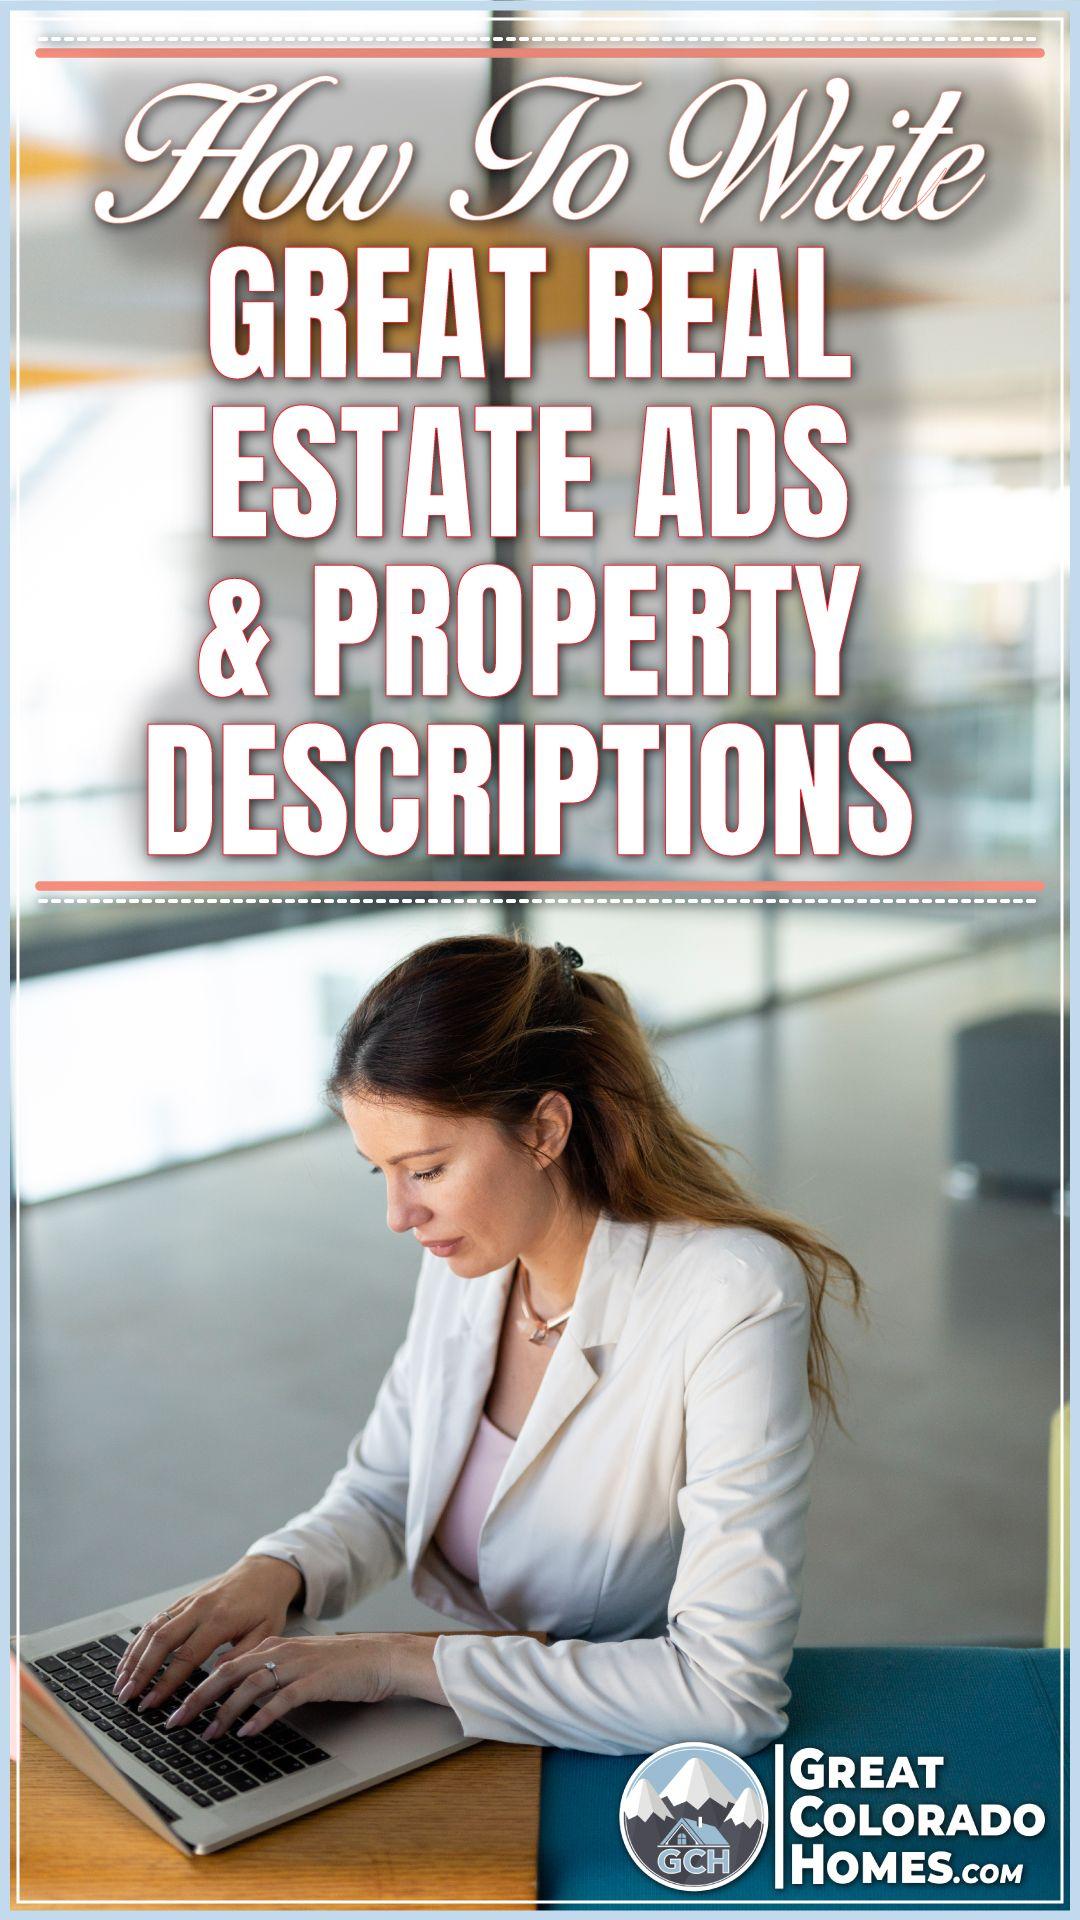 How to write a good real estate ad